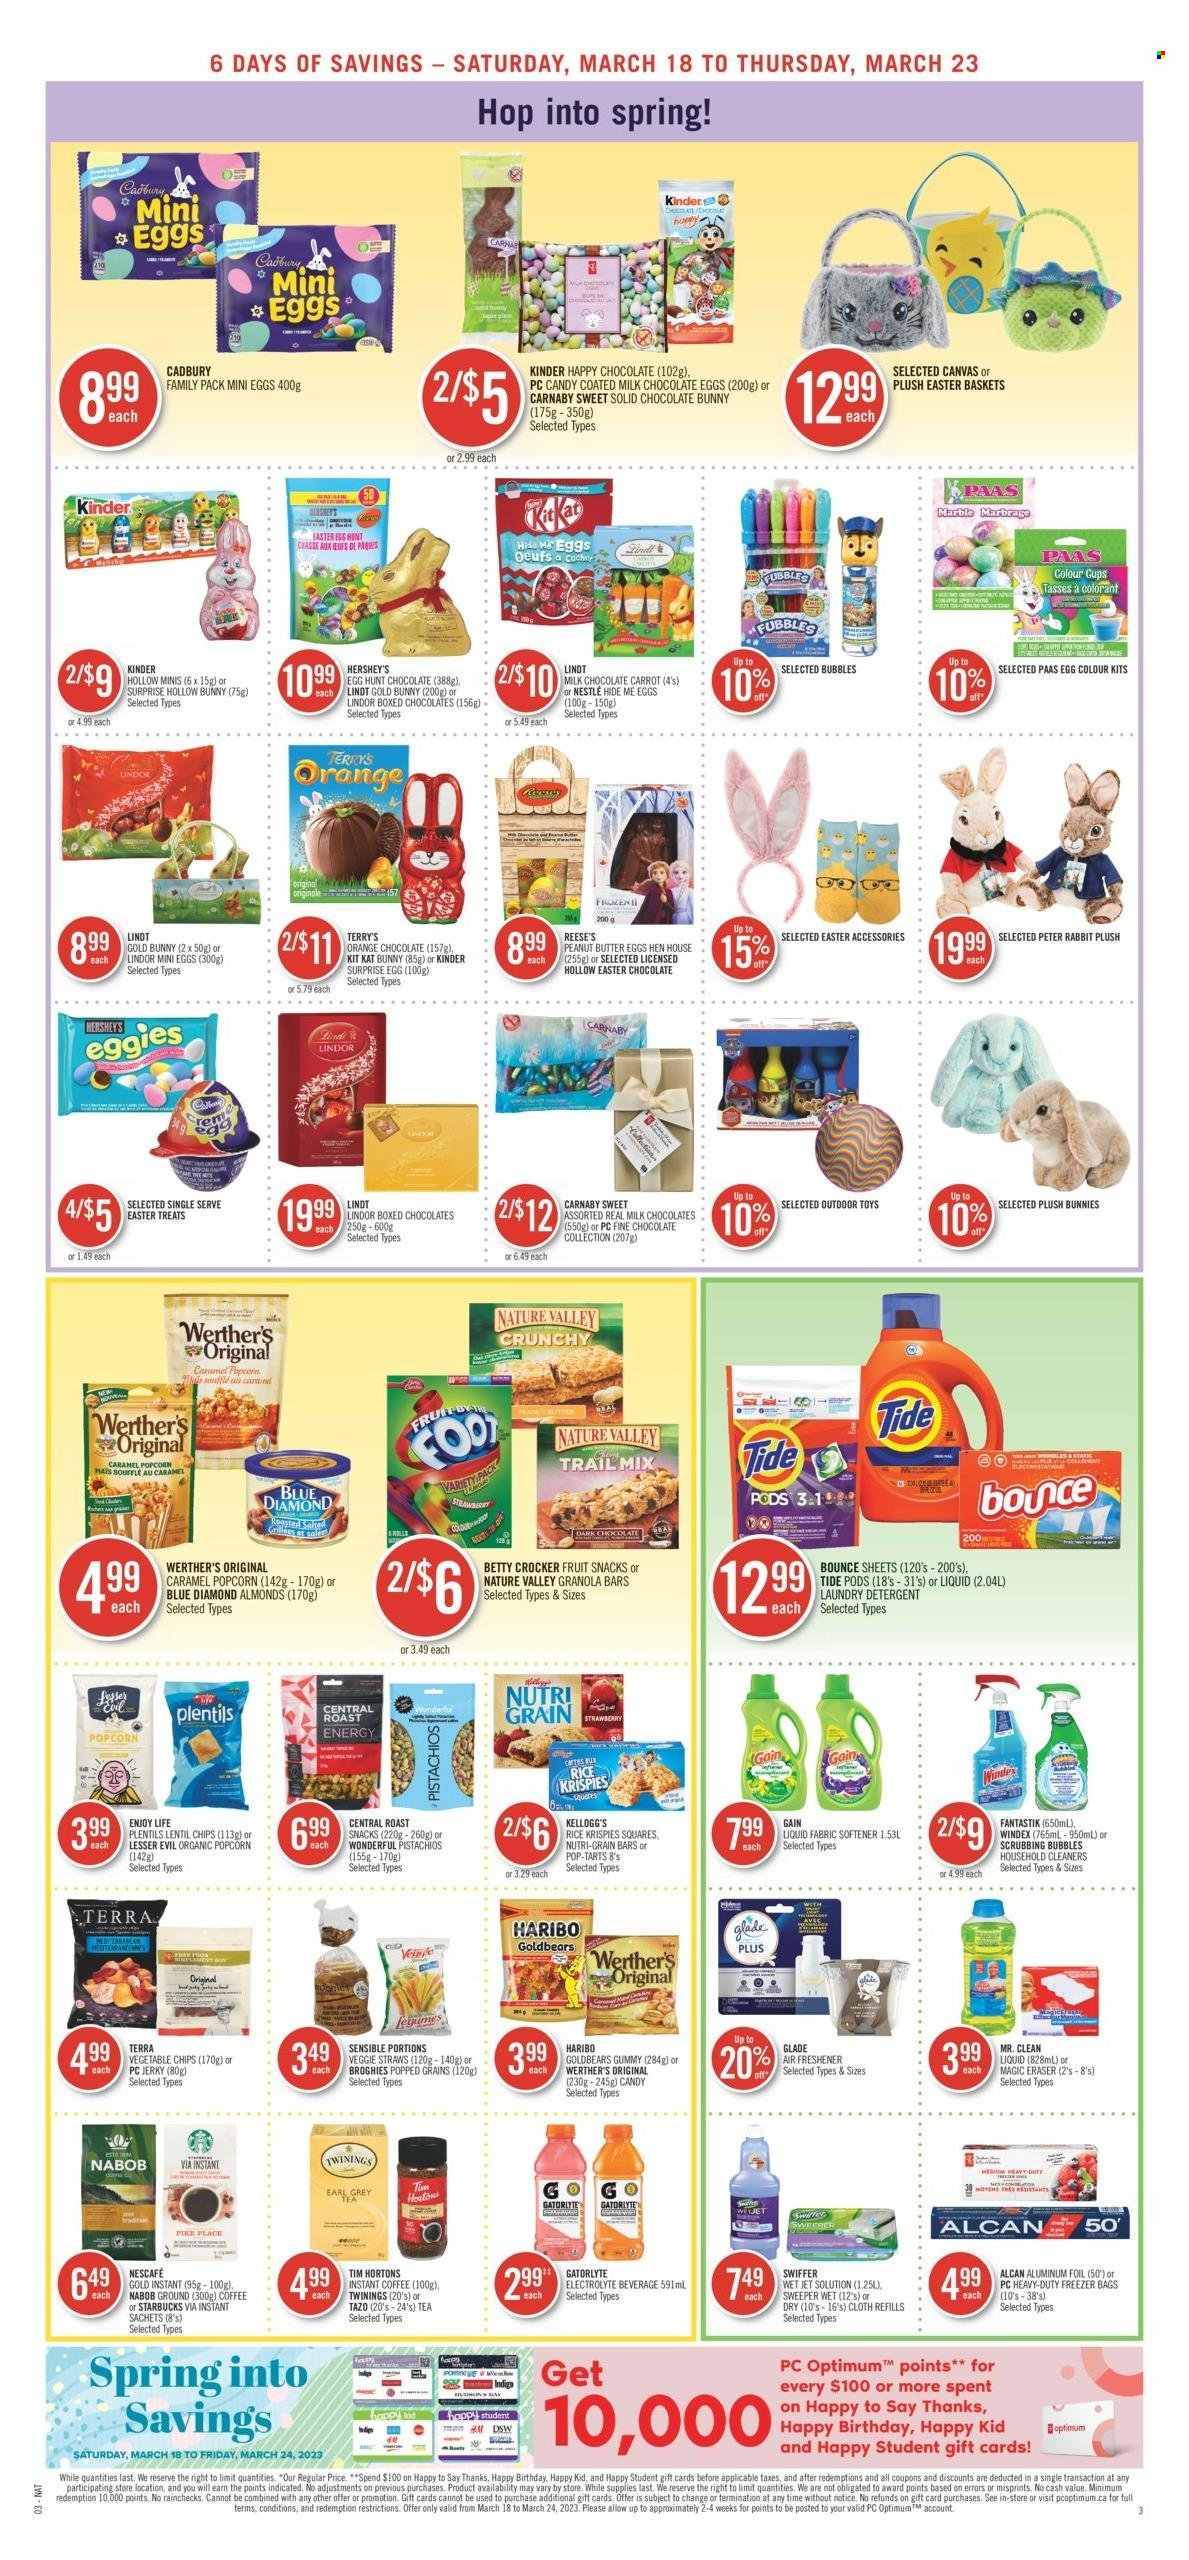 thumbnail - Shoppers Drug Mart Flyer - March 18, 2023 - March 23, 2023 - Sales products - roast, jerky, Reese's, Hershey's, milk chocolate, chocolate, Haribo, easter egg, Kinder Surprise, KitKat, Kellogg's, dark chocolate, Cadbury, Pop-Tarts, chocolate egg, chocolate bunny, fruit snack, chips, popcorn, vegetable chips, veggie straws, granola bar, Rice Krispies, Nature Valley, Nutri-Grain, peanut butter, almonds, pistachios, Blue Diamond, trail mix, tea, Twinings, coffee, instant coffee, Starbucks, Gain, Windex, Scrubbing Bubbles, DAC, Swiffer, Tide, fabric softener, laundry detergent, Bounce, Jet, cup, aluminium foil, freezer bag, air freshener, Glade, Optimum, toys, outdoor toy, detergent, Nestlé, Lindt, Lindor, Nescafé. Page 5.